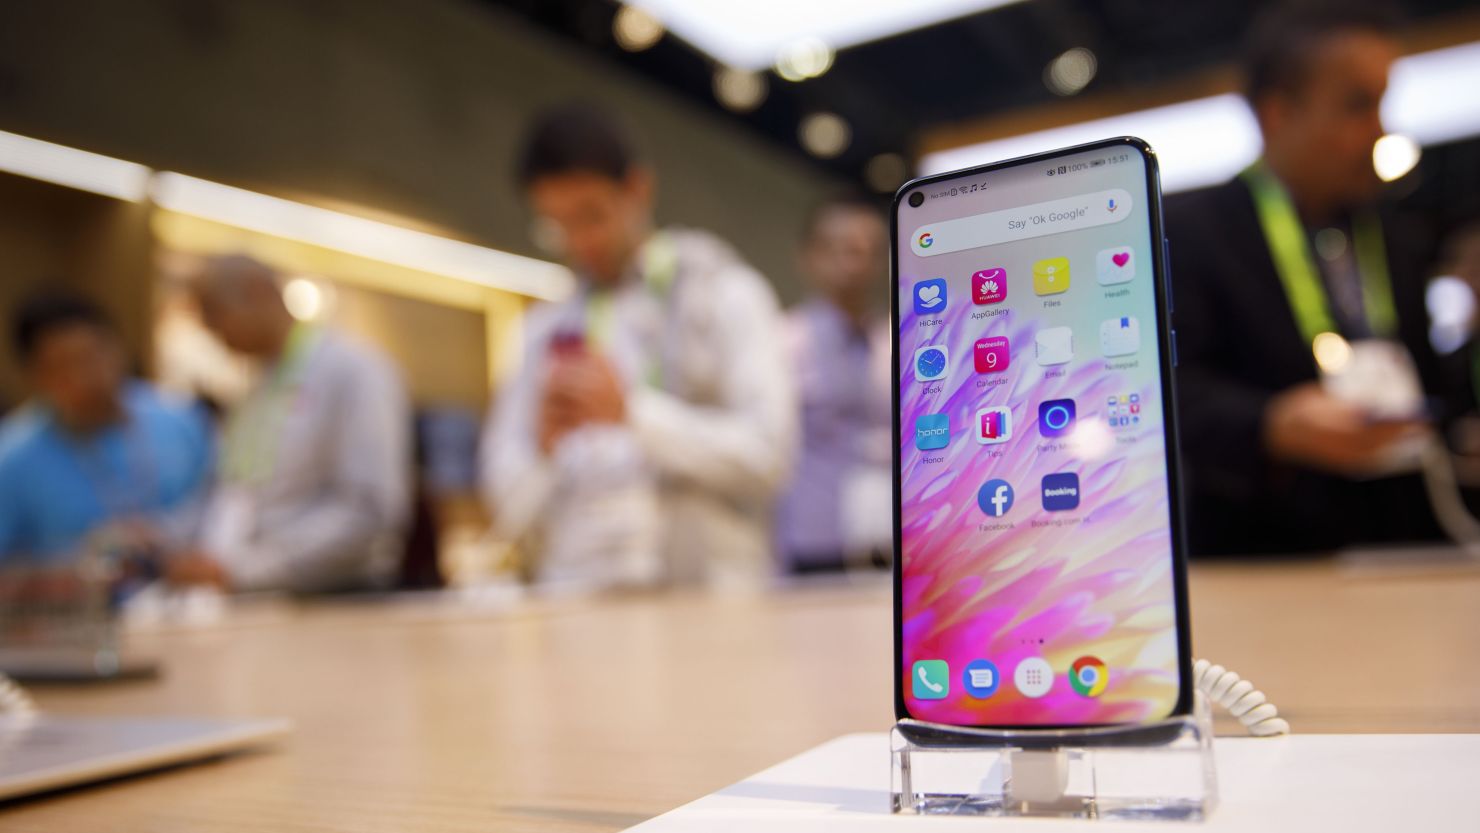 The Huawei Technologies Co. Honor View 20 smartphone is displayed at the company's booth at the 2019 Consumer Electronics Show (CES) in Las Vegas, Nevada, U.S., on Wednesday, Jan. 9, 2019. 